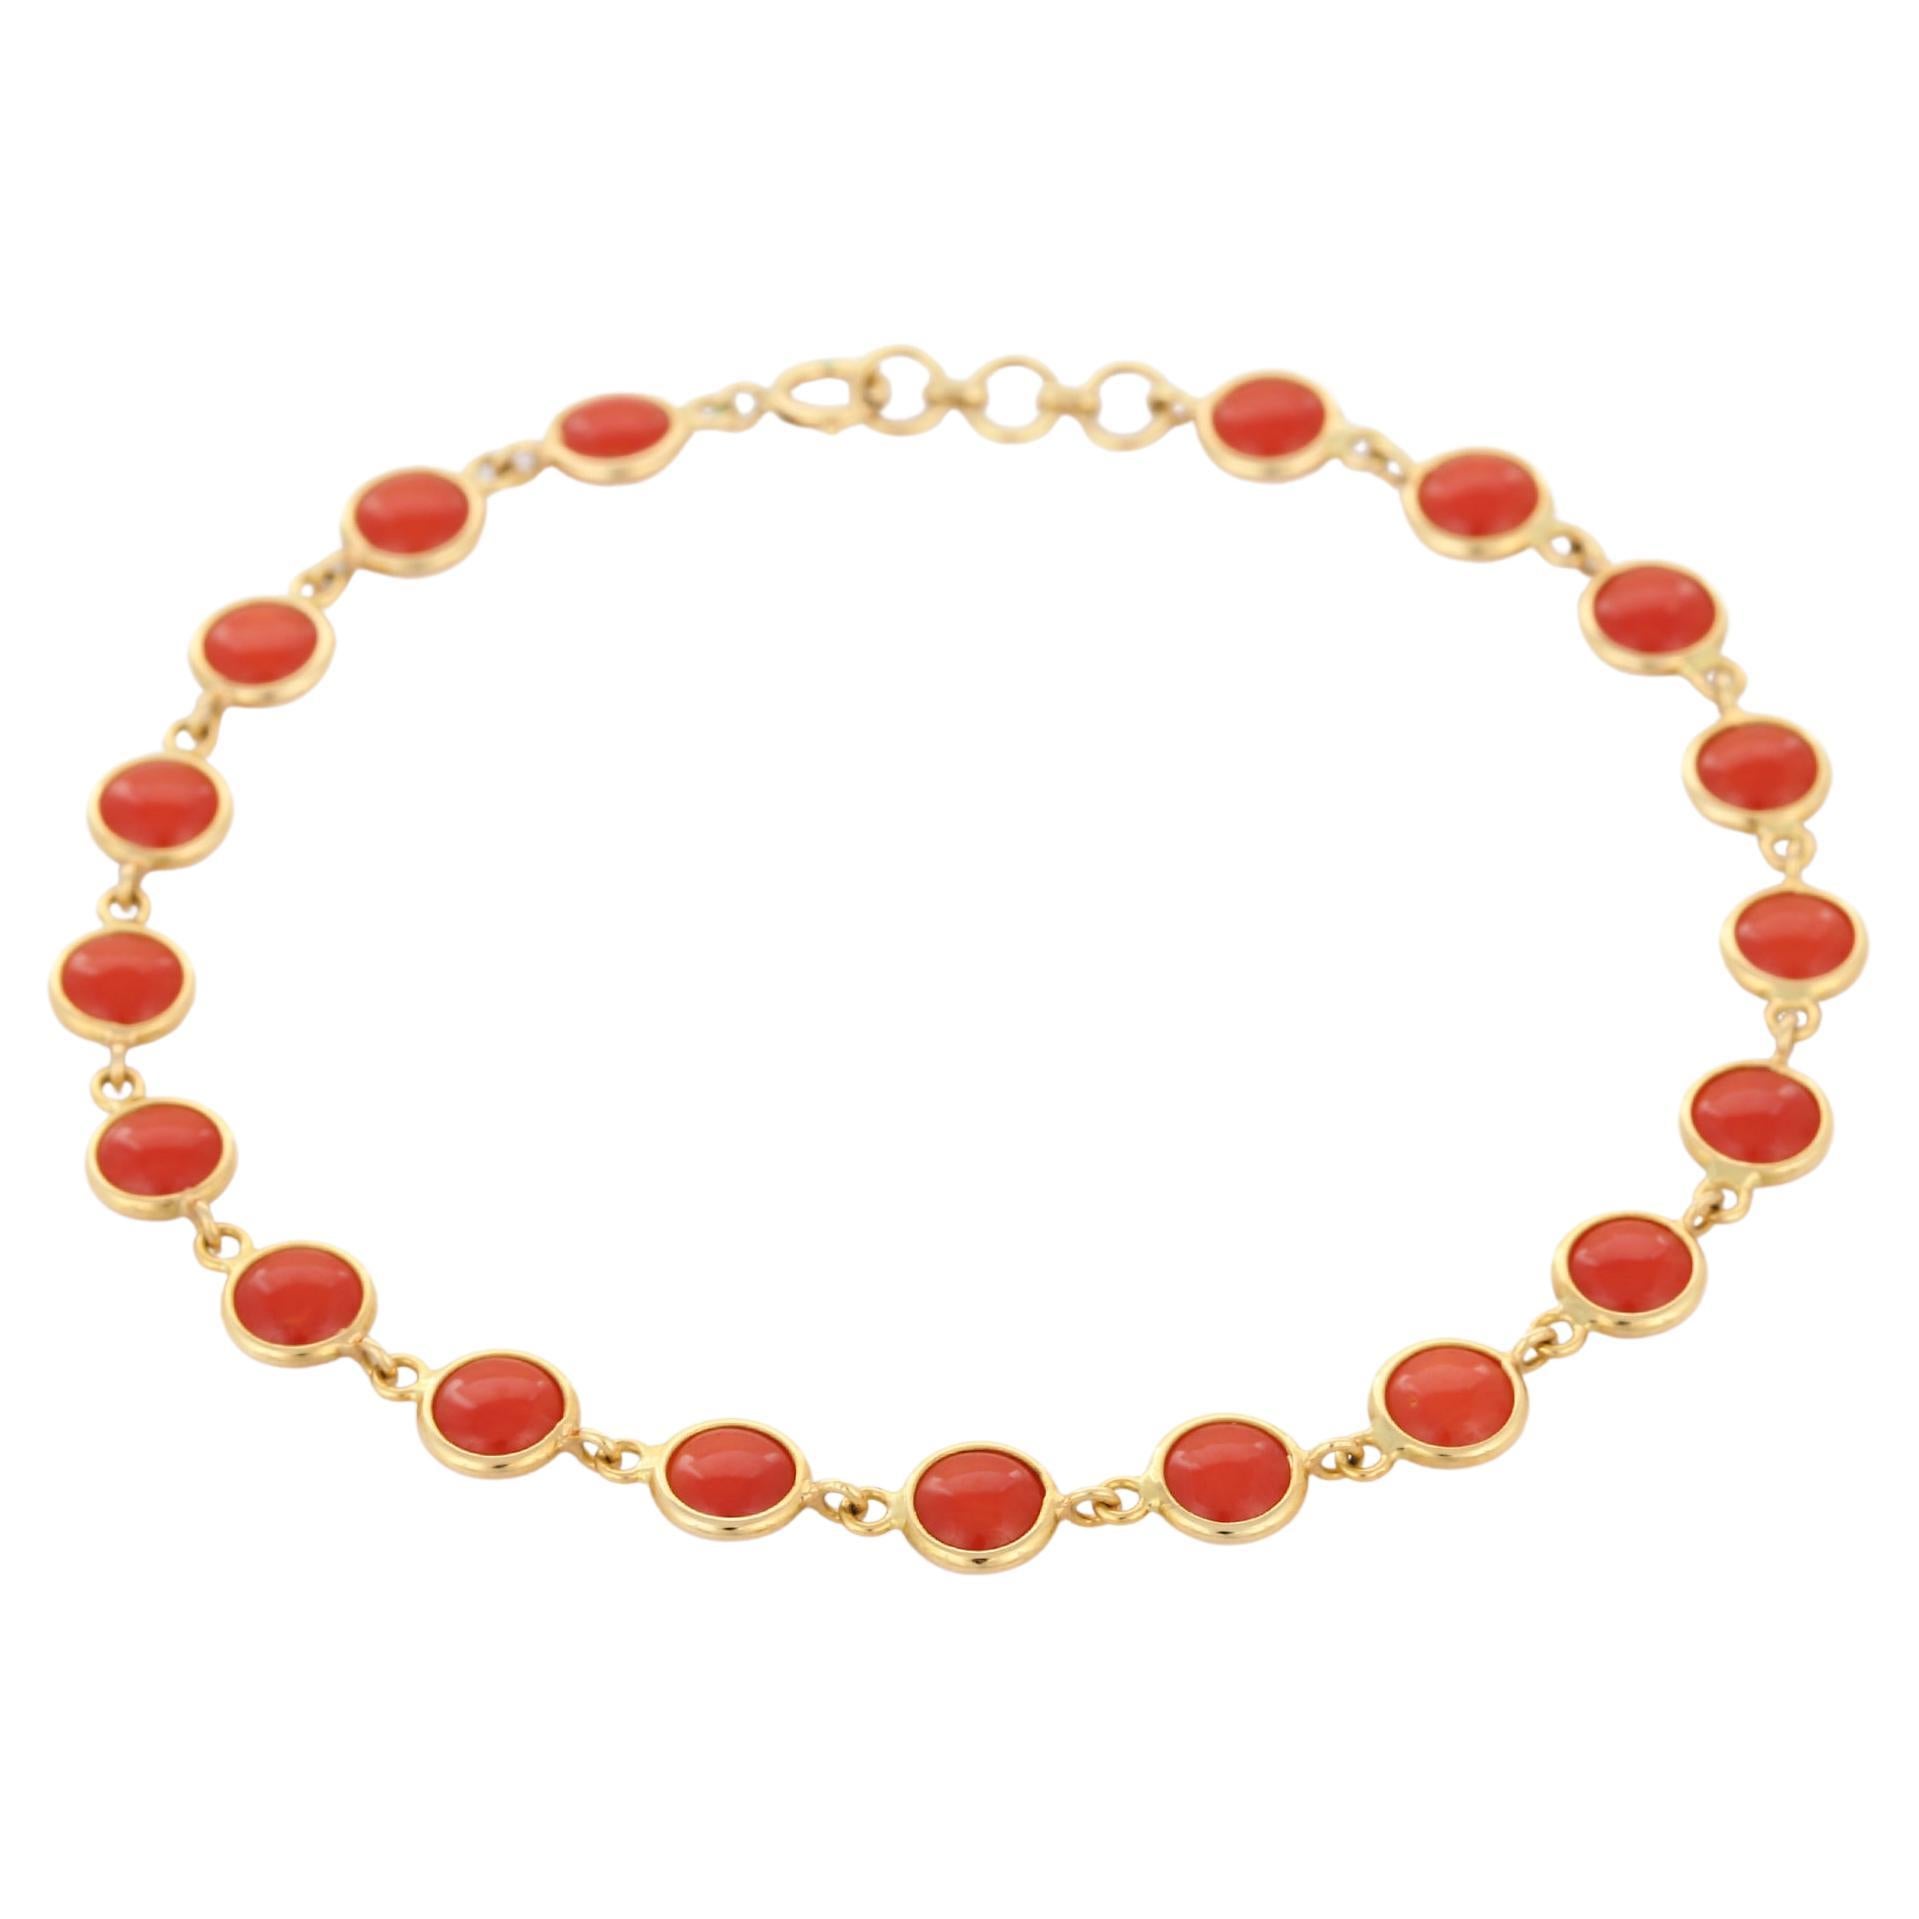 8.2 ct Round Cut Coral Station Chain Bracelet Studded in 18K Yellow Gold